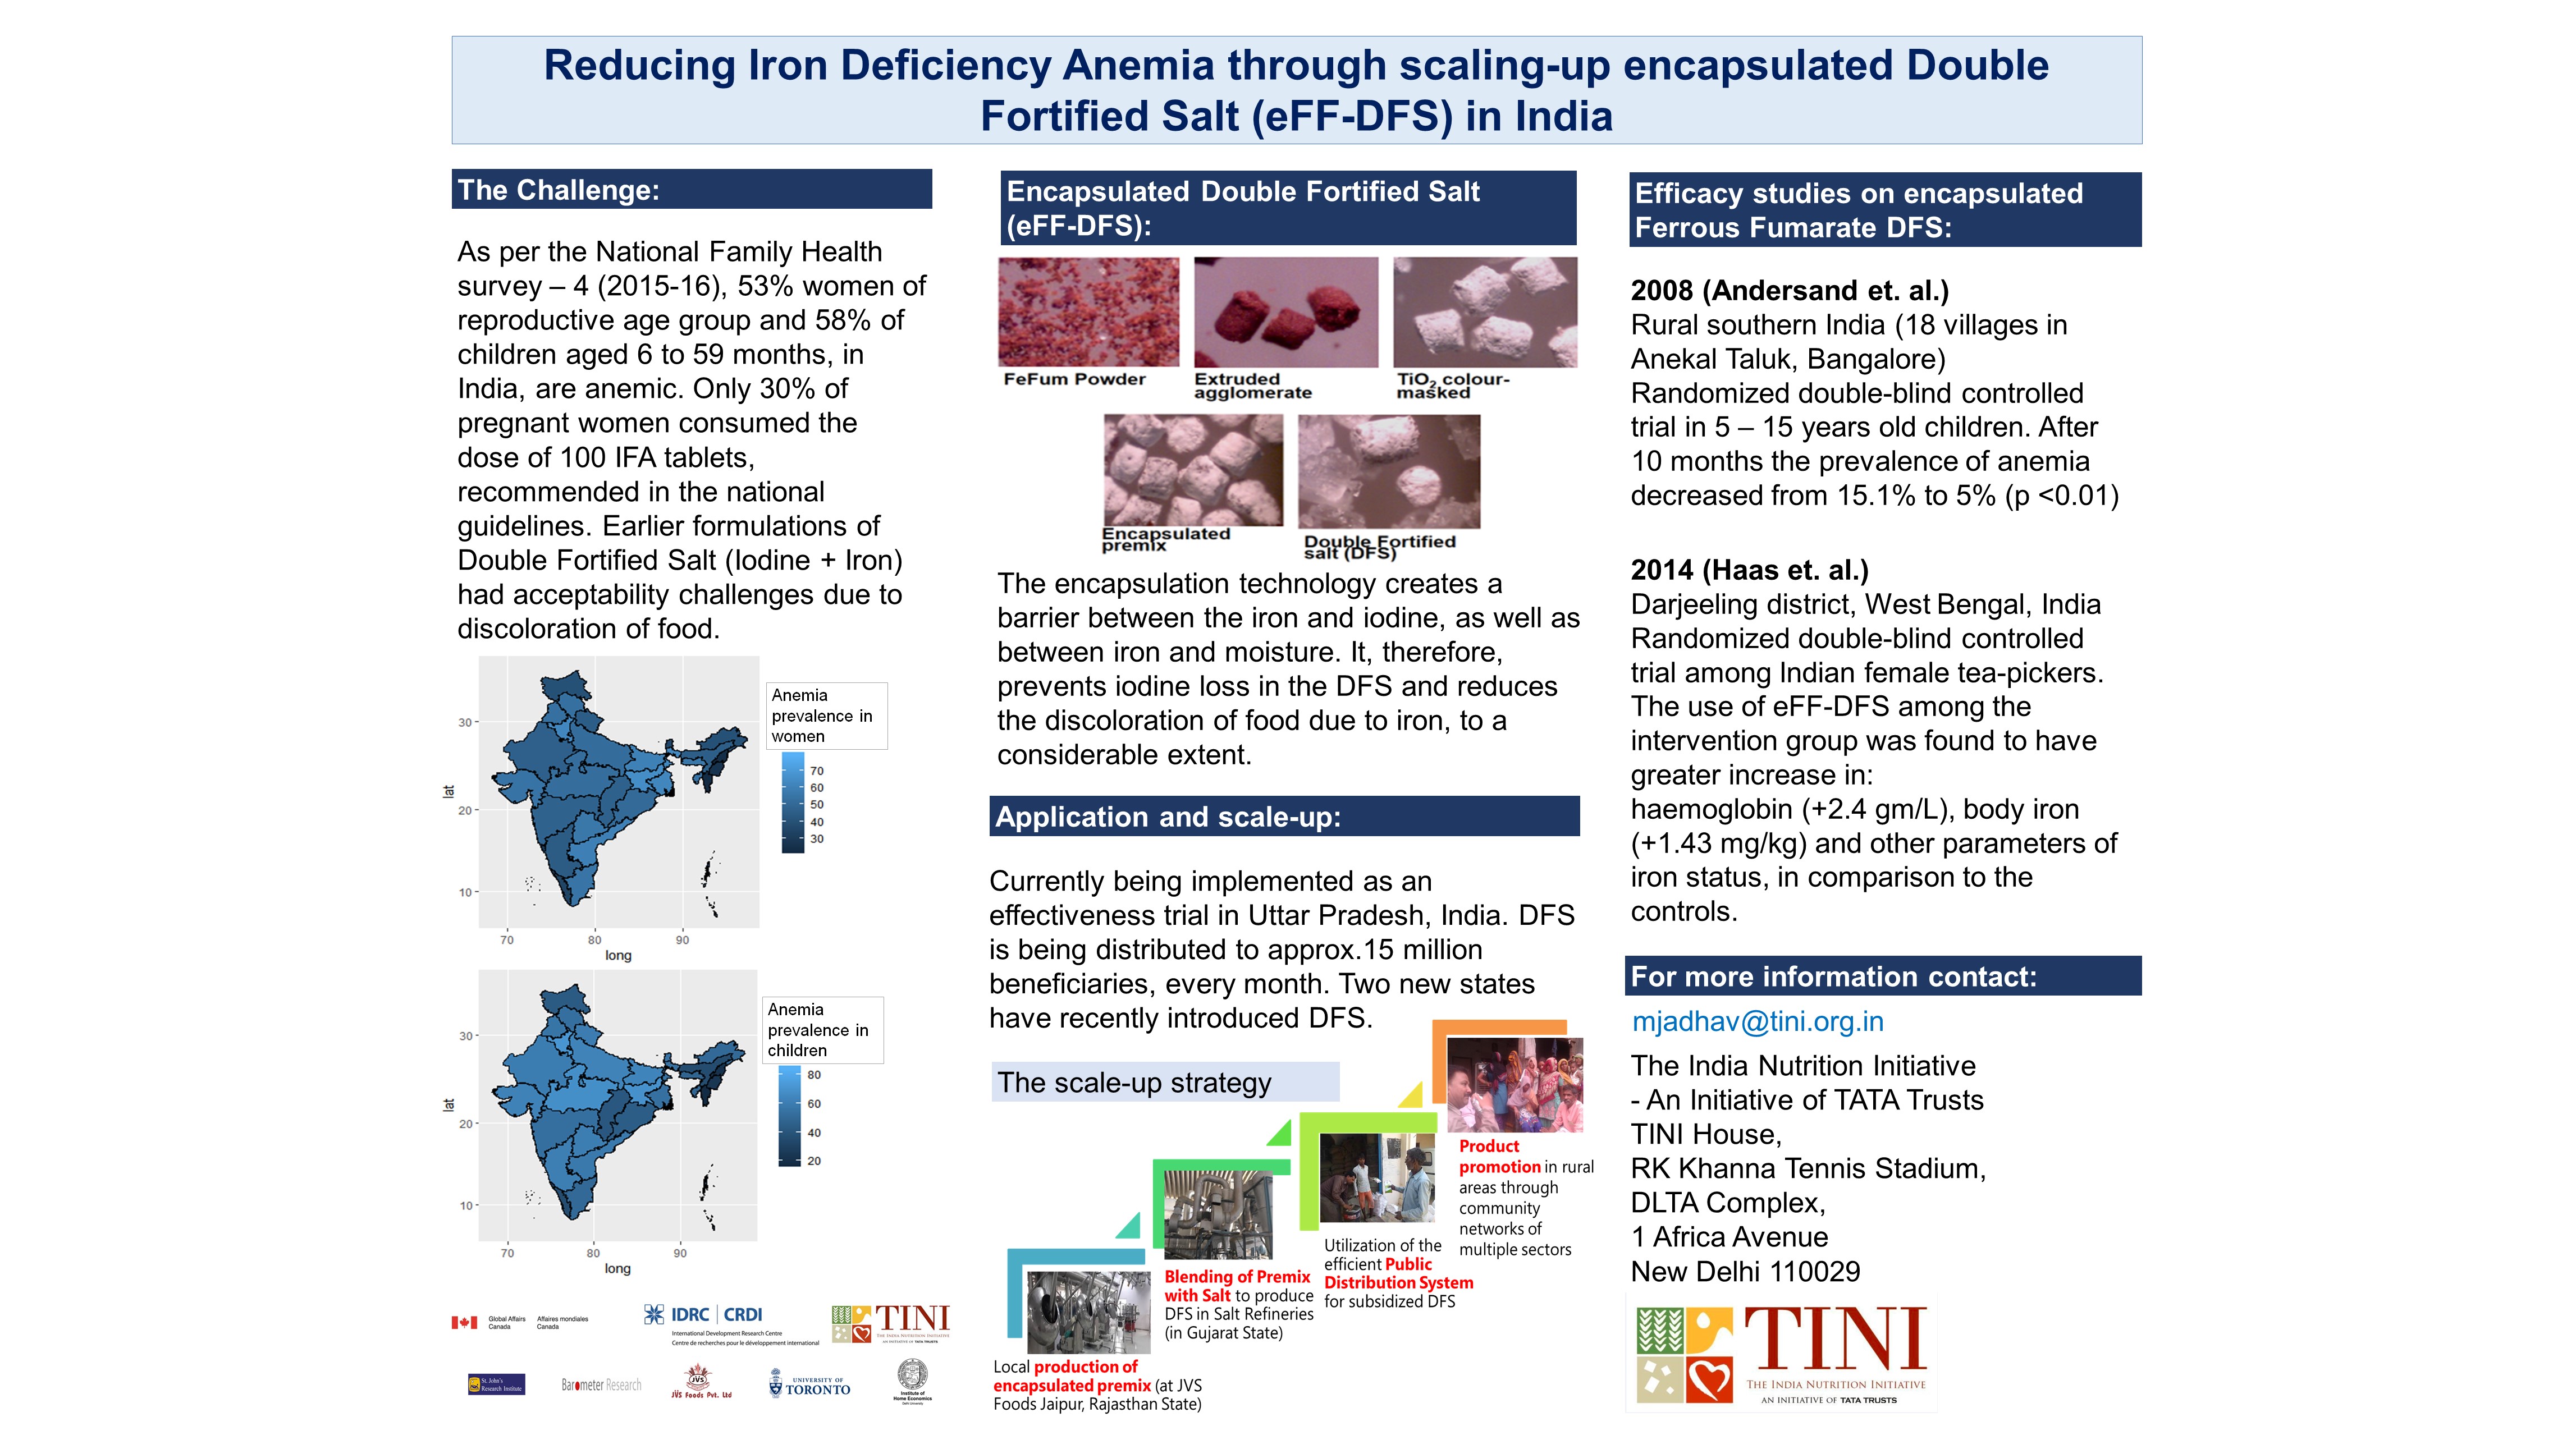 Reducing Iron Deficiency Anemia through scaling-up encapsulated Double Fortified Salt (eFF-DFS) in India